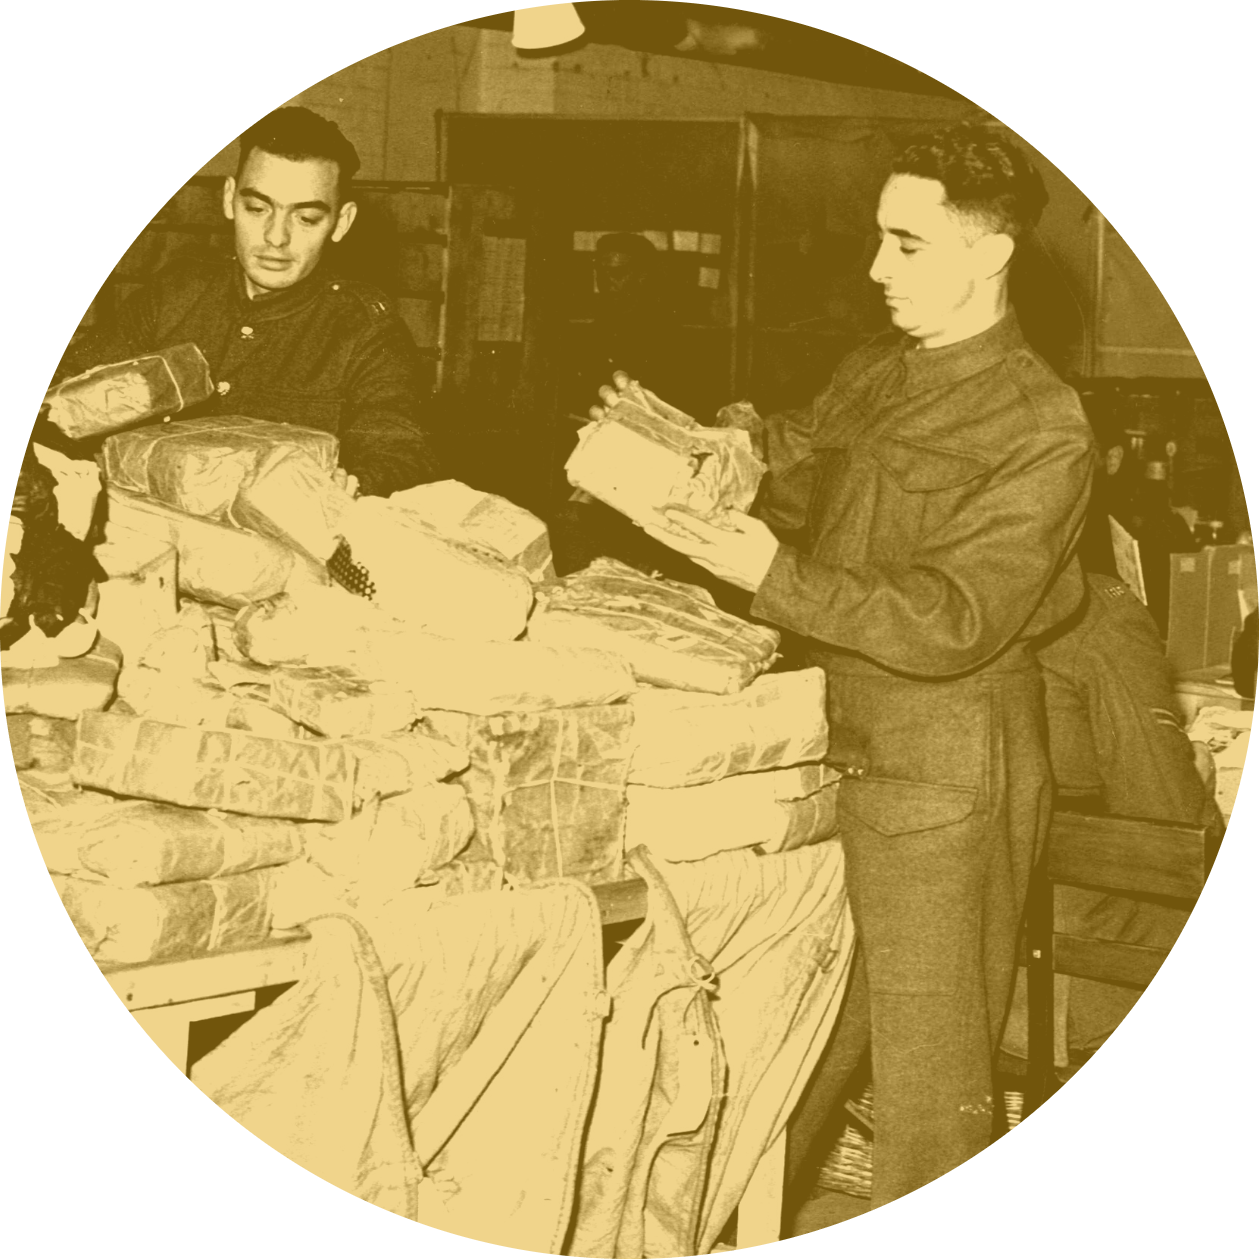 World War 2 soldiers sorting through parcels